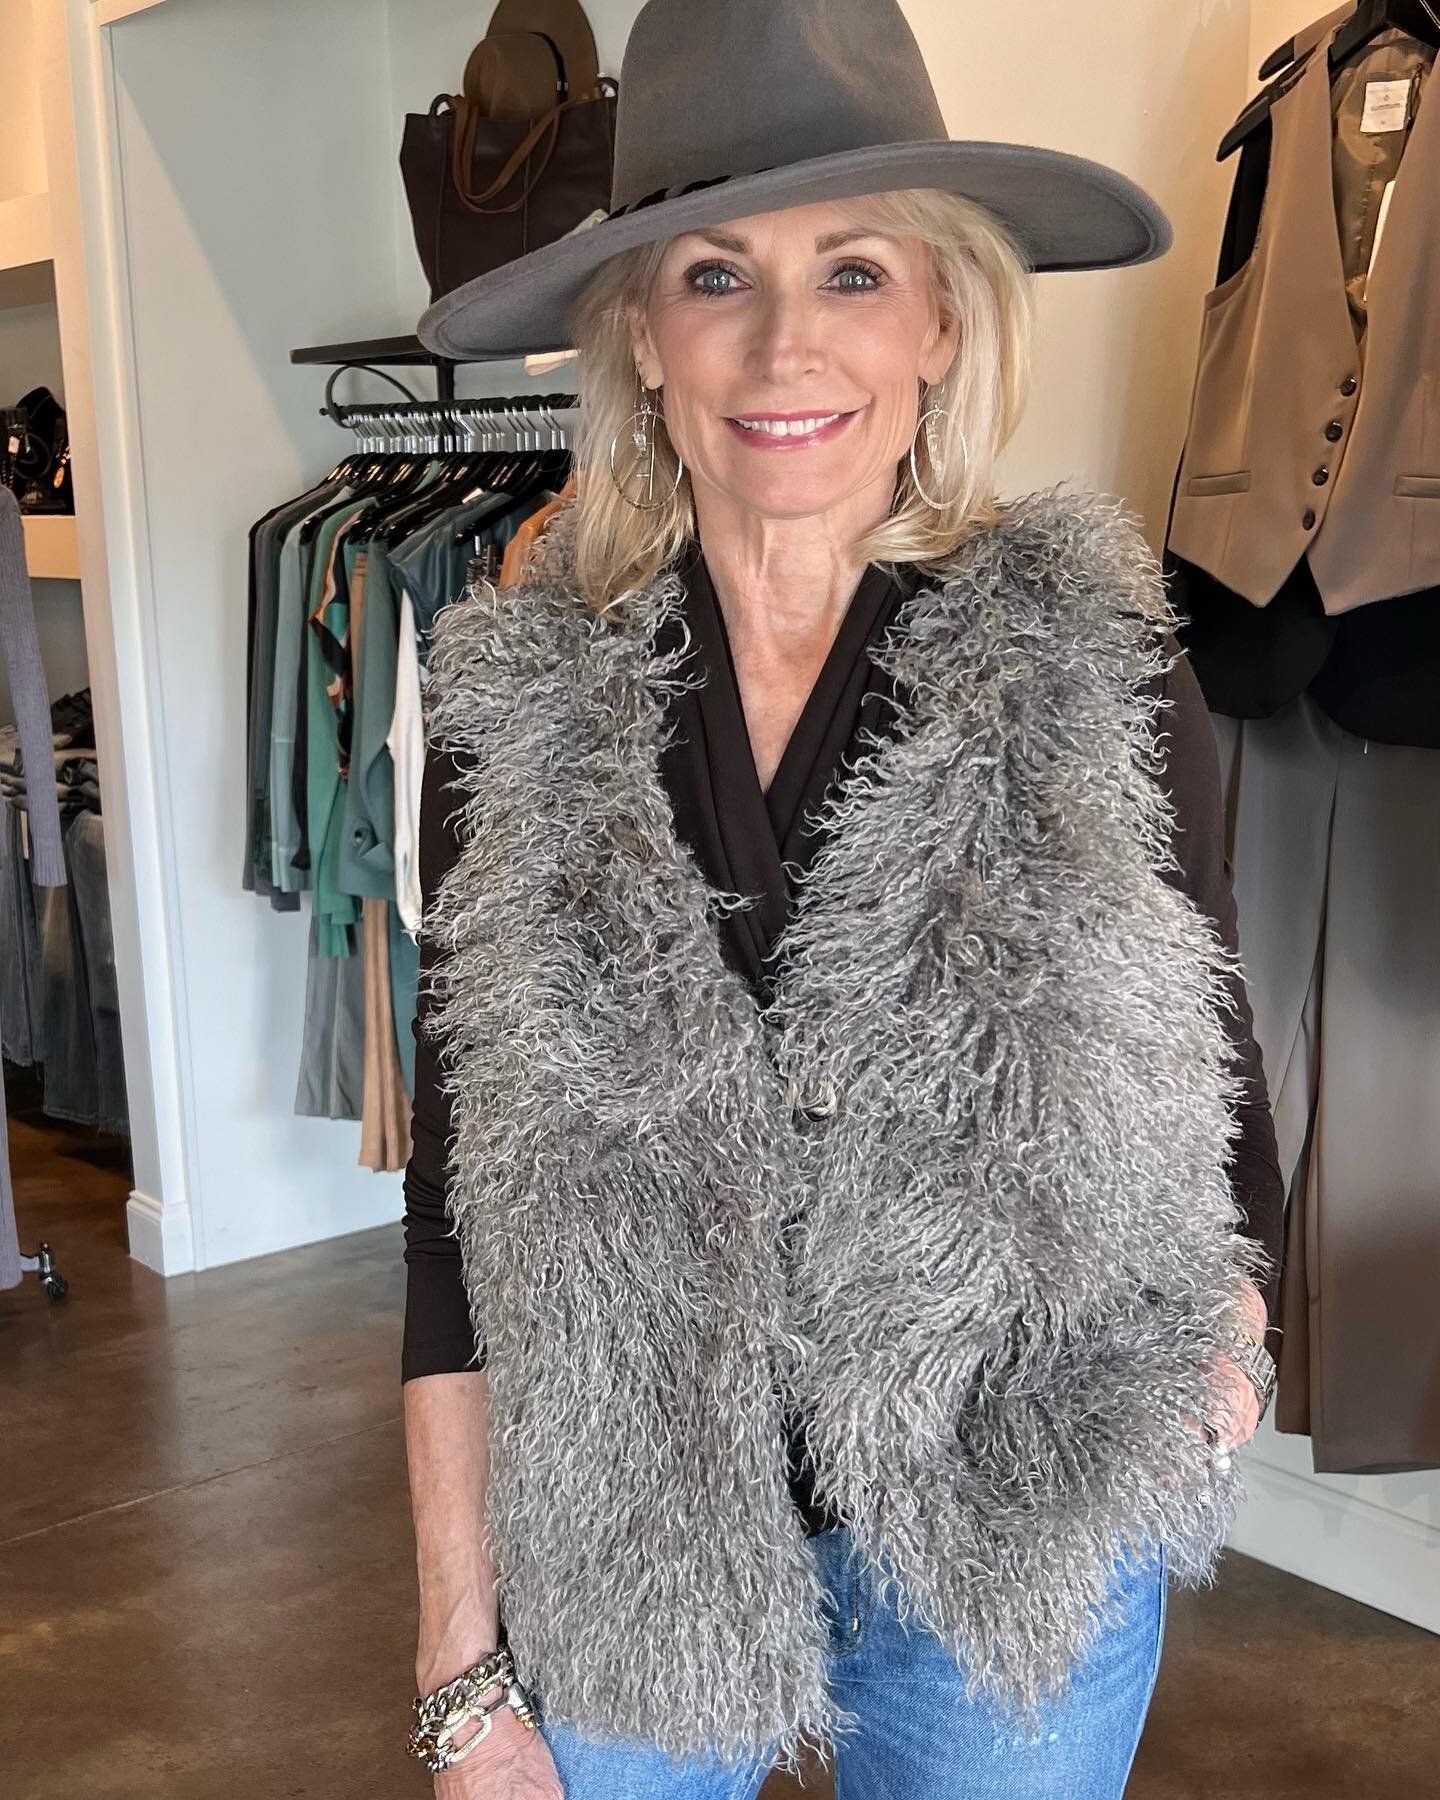 Finally time for some fun outerwear. We are loving this vest from @summumwoman - great addition to your closet. 
#dressingroomcoach 
#shopvestas 
#outerwear 
#fallvibes 
#fallfashion 
#style 
#lookgoodfeelgood